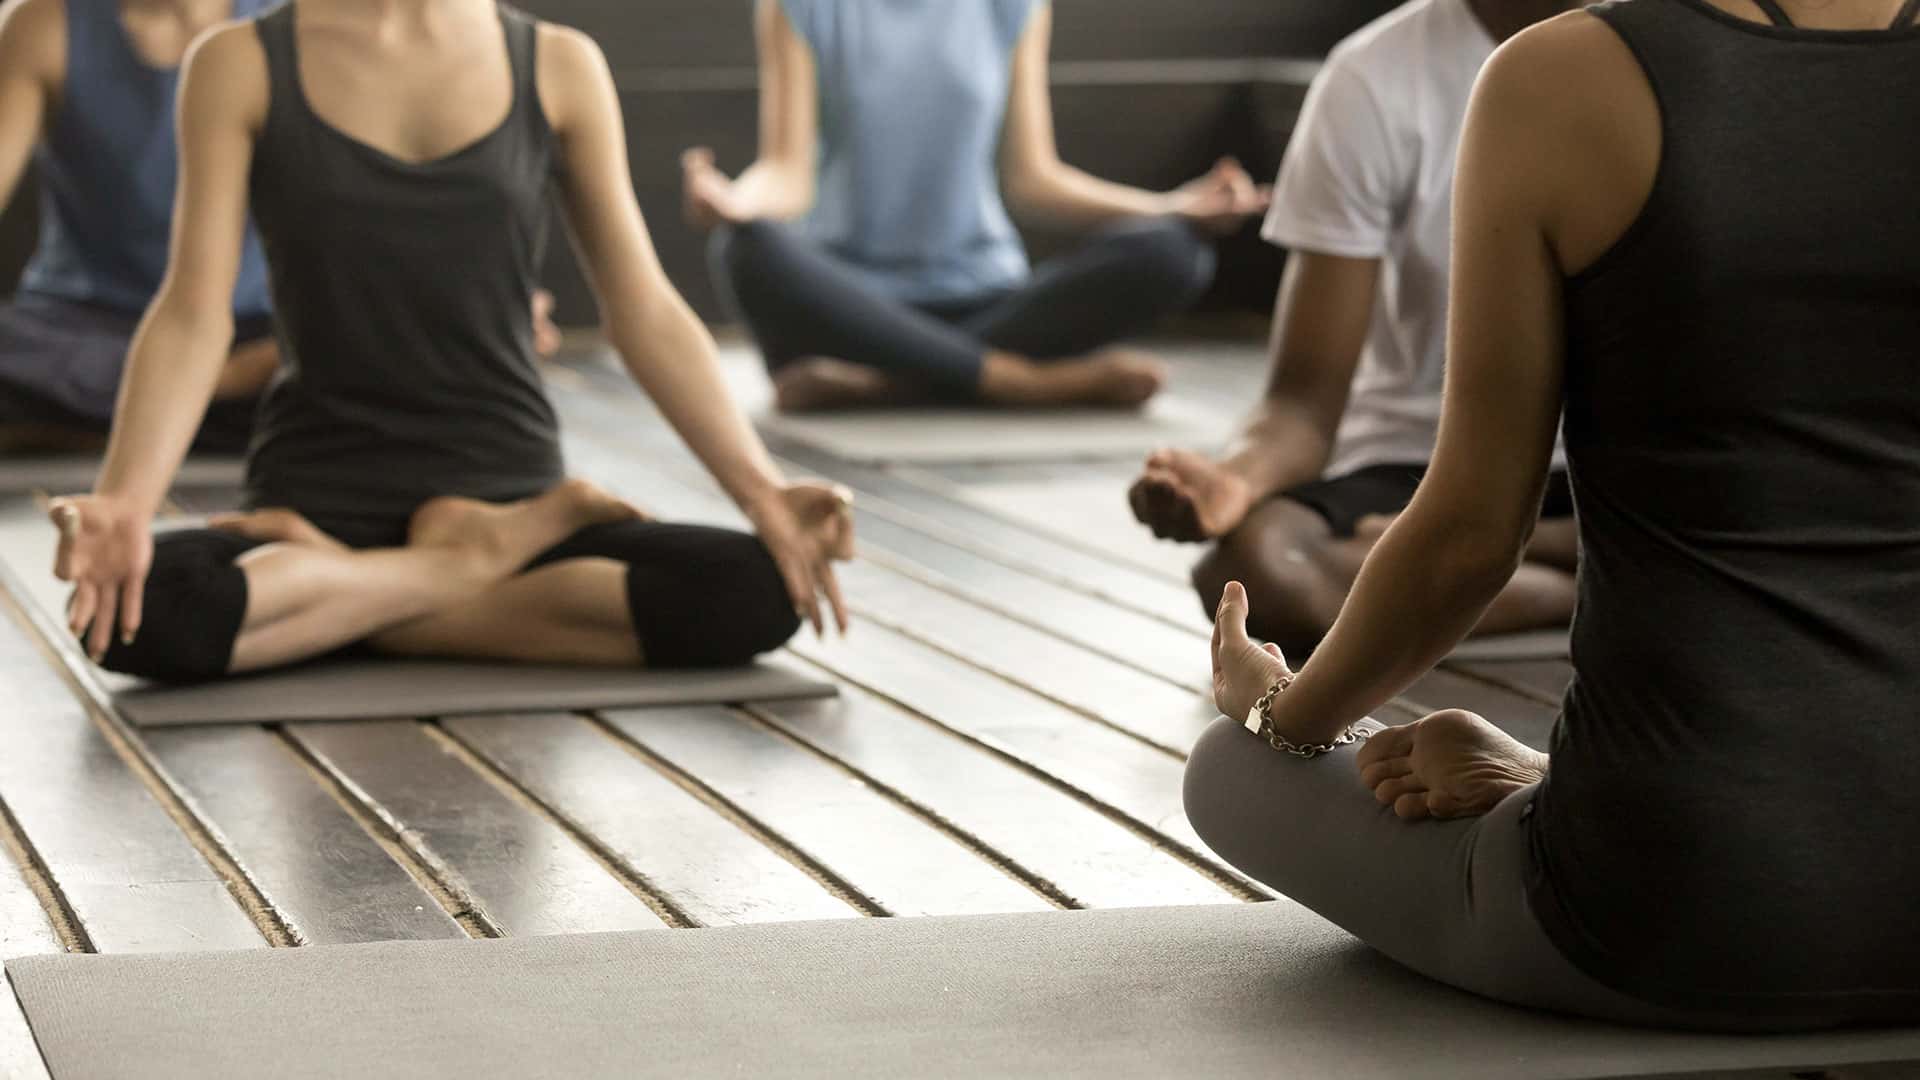 Yoga Class | 3 Ways to Stay Active and Healthy During COVID-19